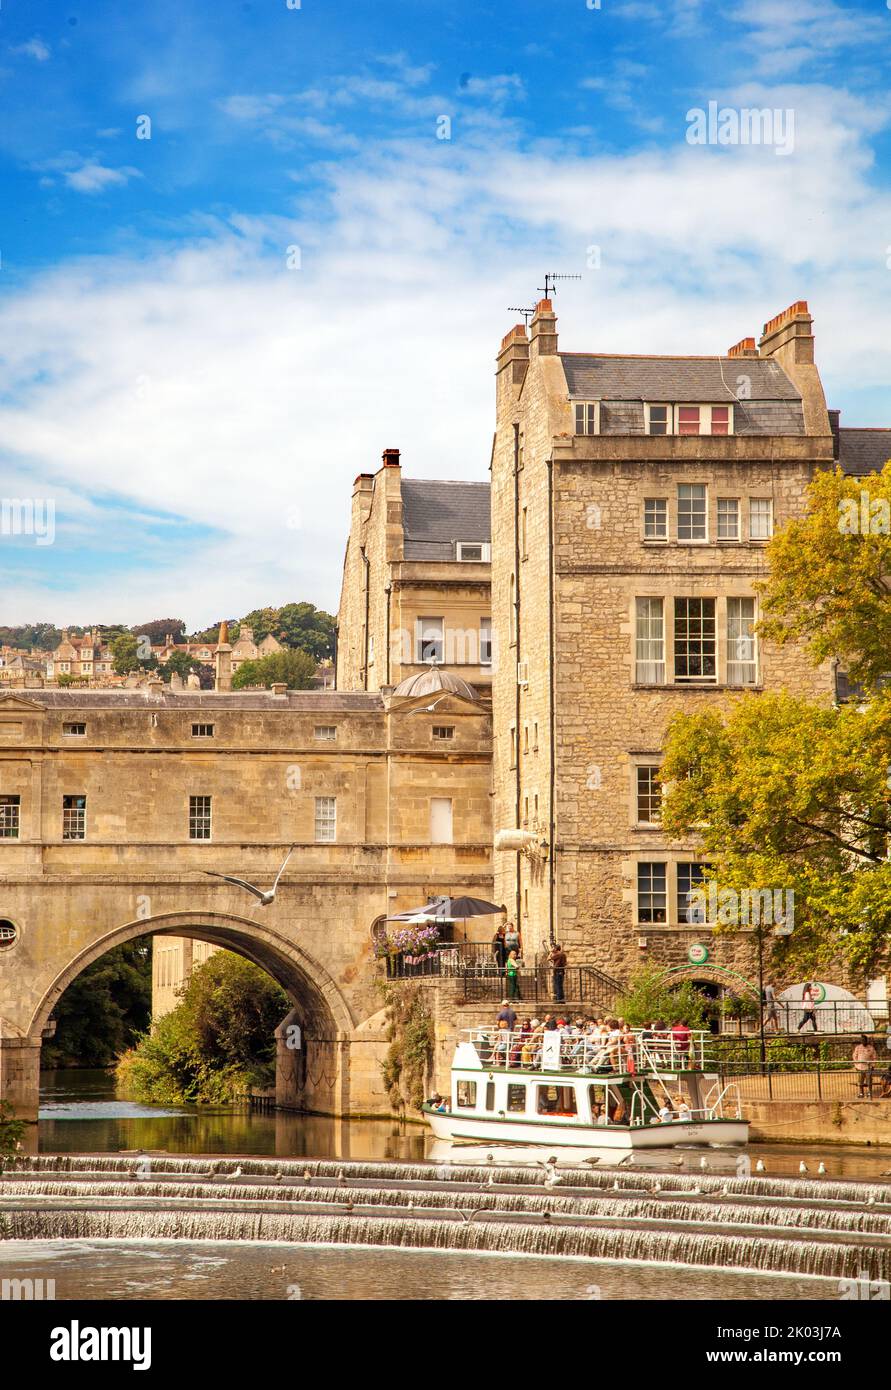 The Pulteney Bridge  over the River Avon in the Somerset town  of Bath ,Designed by Robert Adam in a Palladian style, it has shops both sides Stock Photo